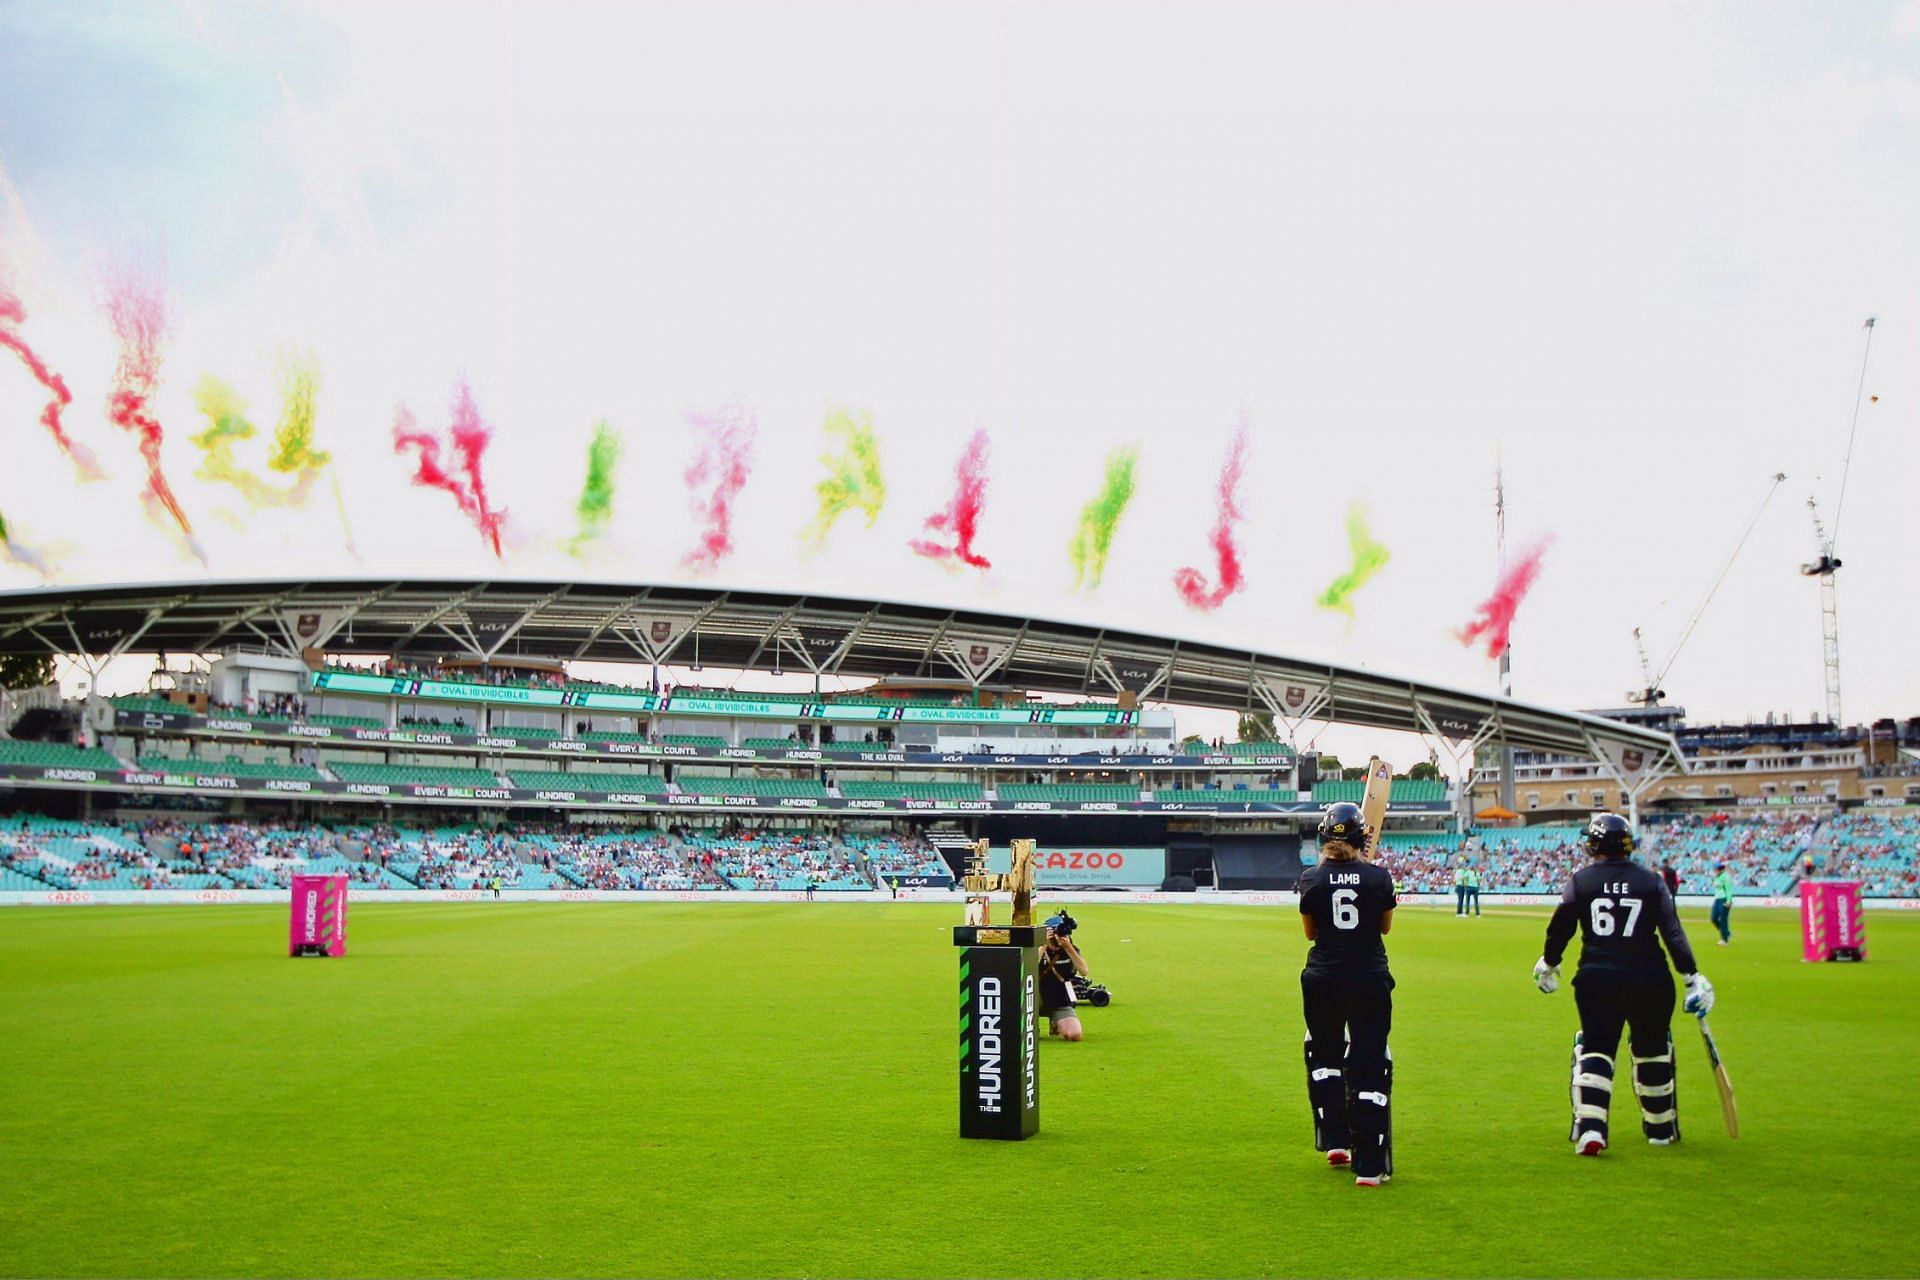 A Hundred fixture at the Oval. (Credits: Twitter)